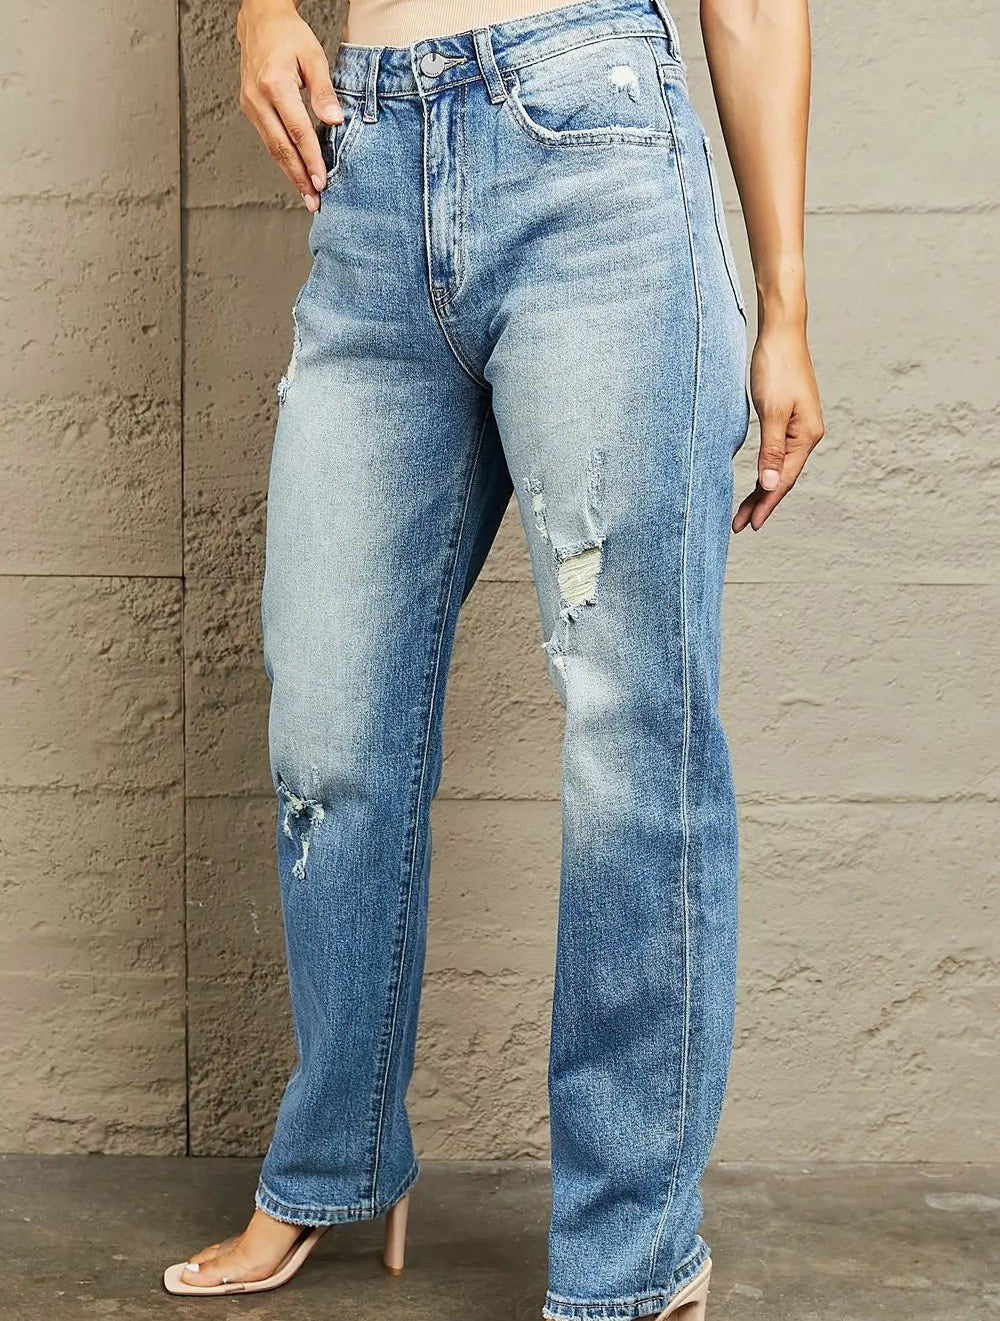 HIGH WAISTED FASHION TRENDS STRAIGHT LEG JEANS - MeadeuxHIGH WAISTED FASHION TRENDS STRAIGHT LEG JEANSJeansMeadeux